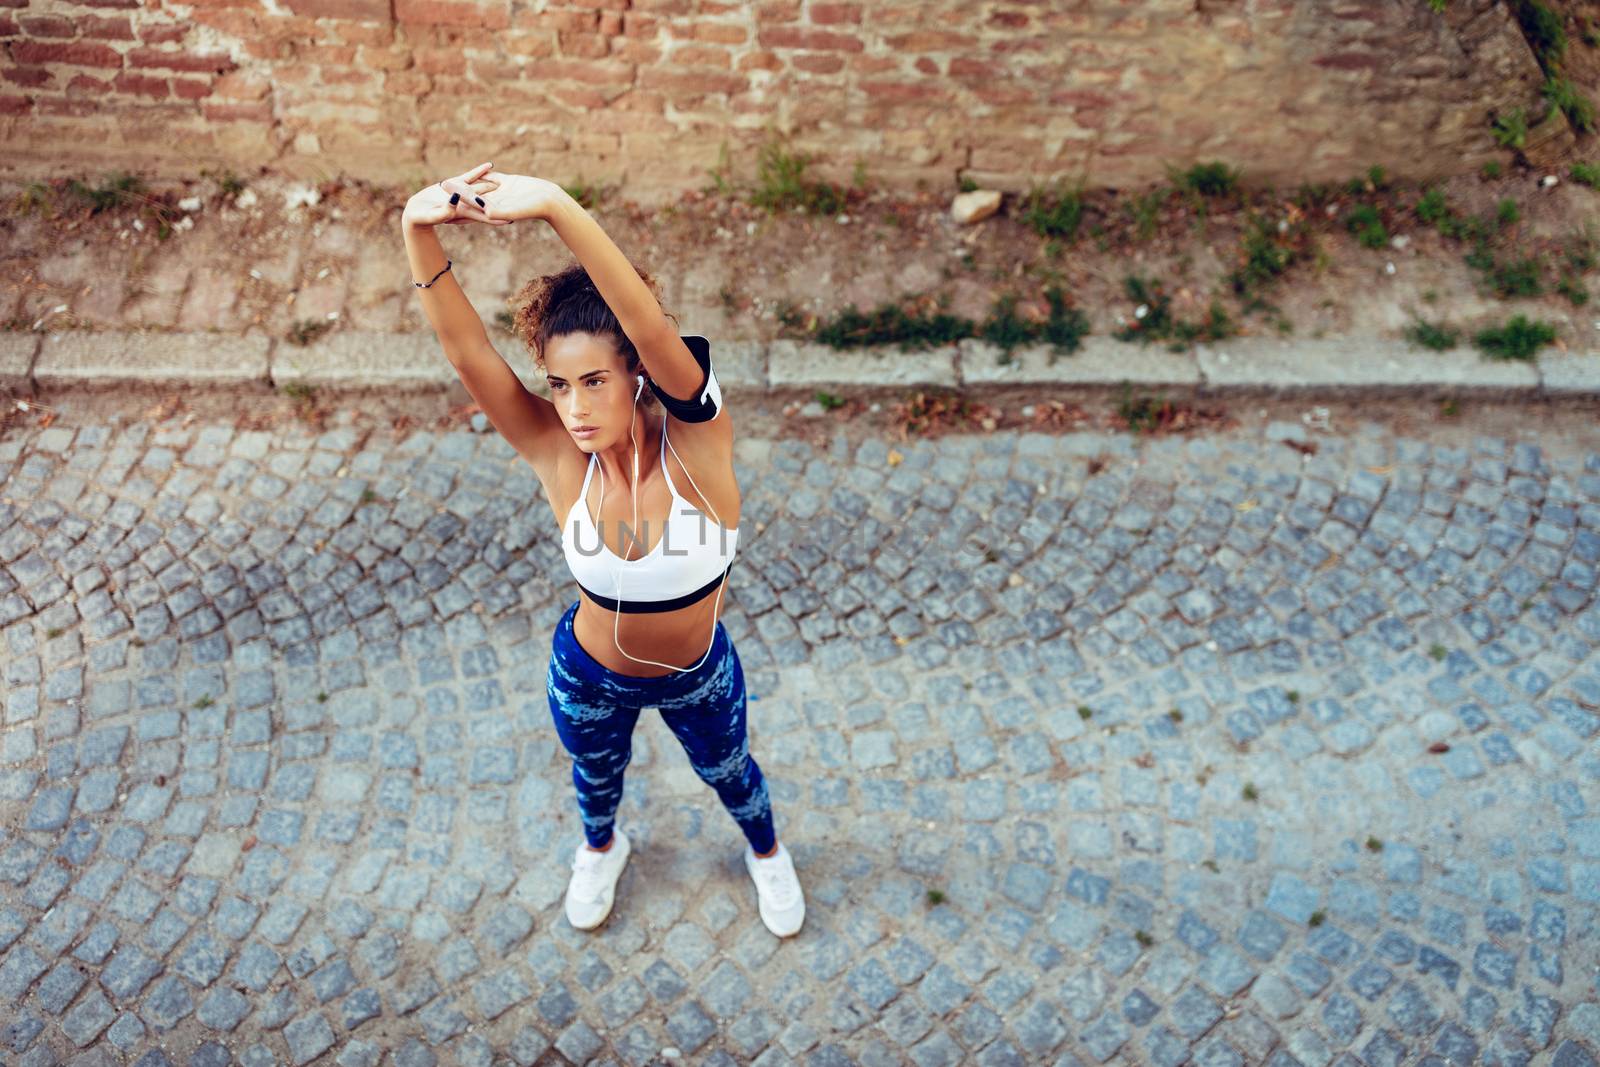 Young fitness woman with headphones doing stretching exercise.